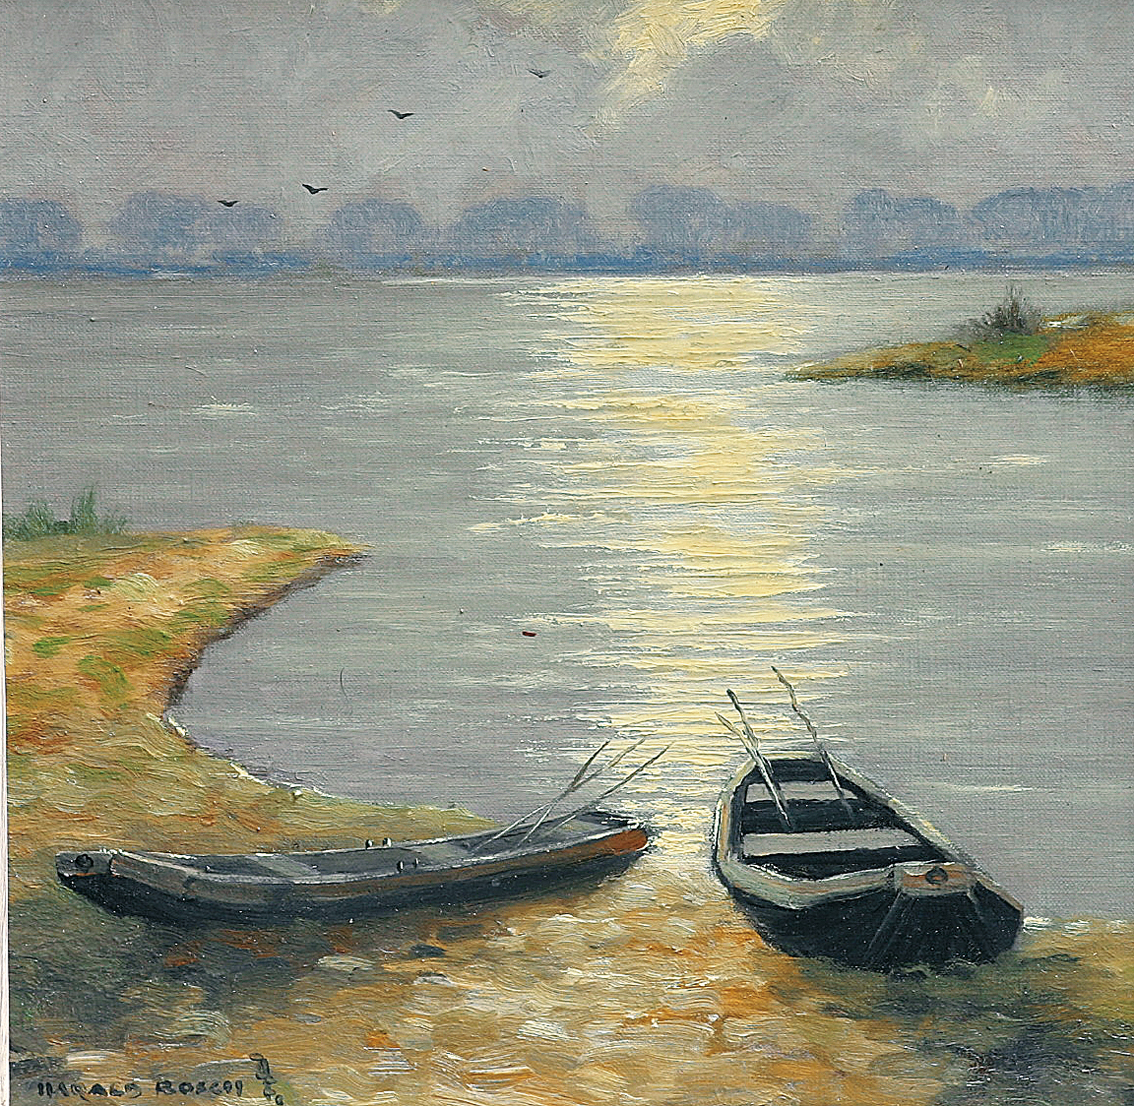 An impression of the Lower Rhine with sleeping boats